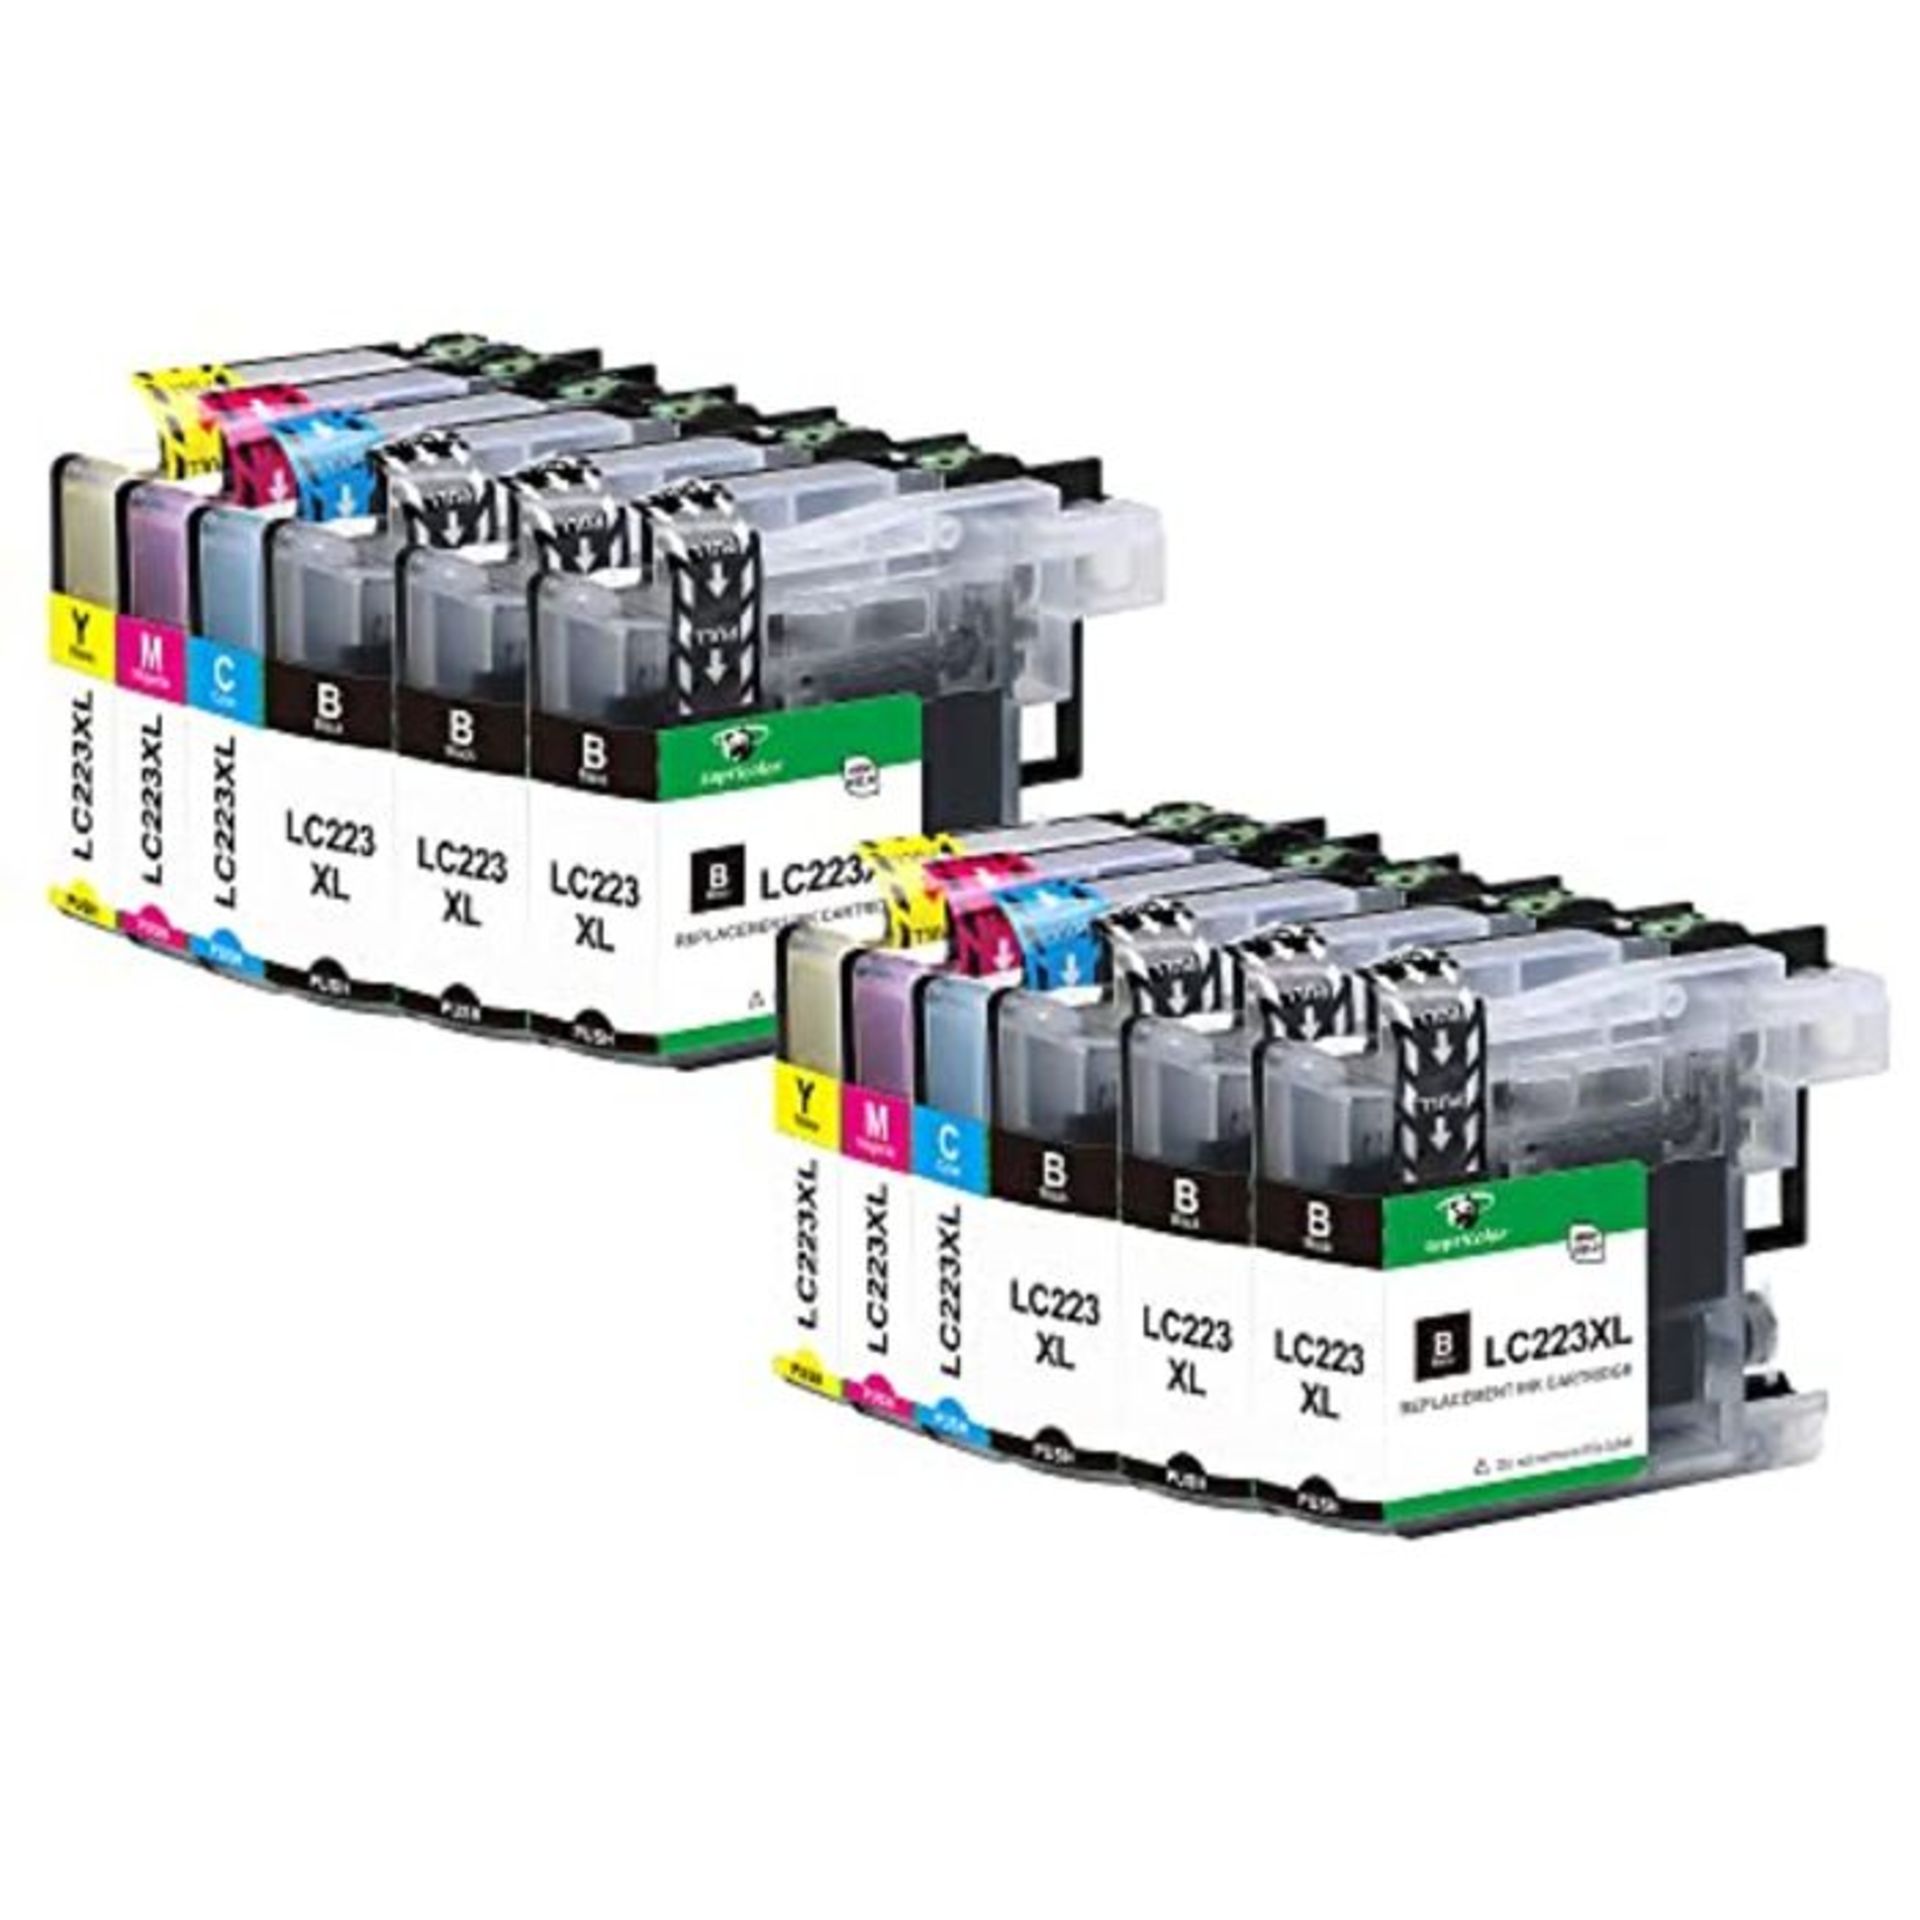 Supricolor Replacement Brother LC223XL Ink Cartridges, Compatible LC223 Ink Work for B